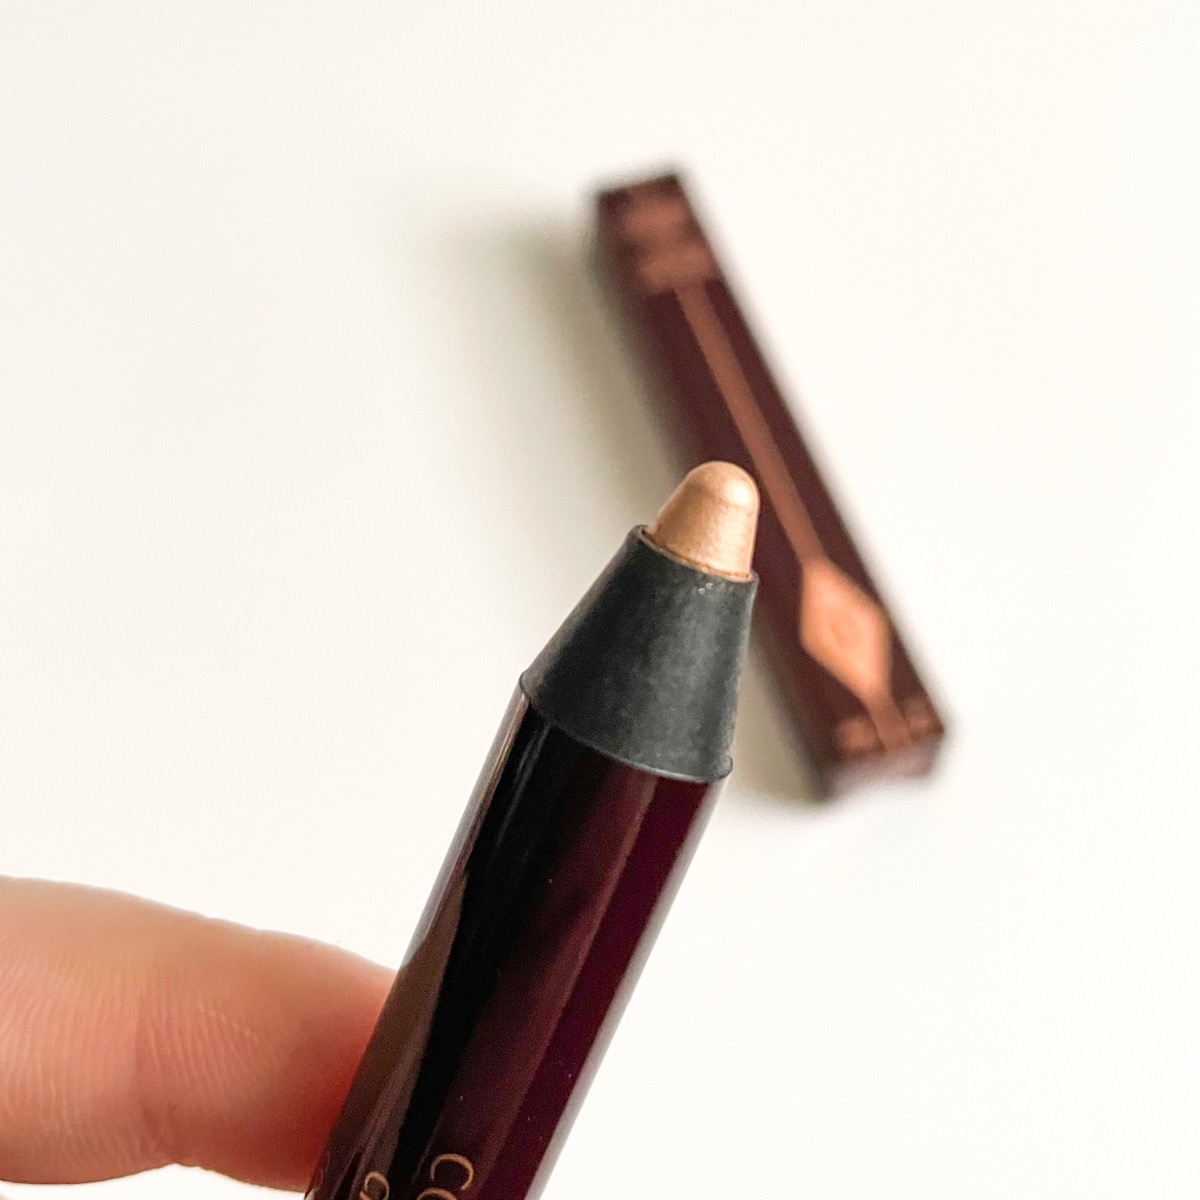 maroon shadow stick, lid off, showing shimmery champagne eyeshadow color